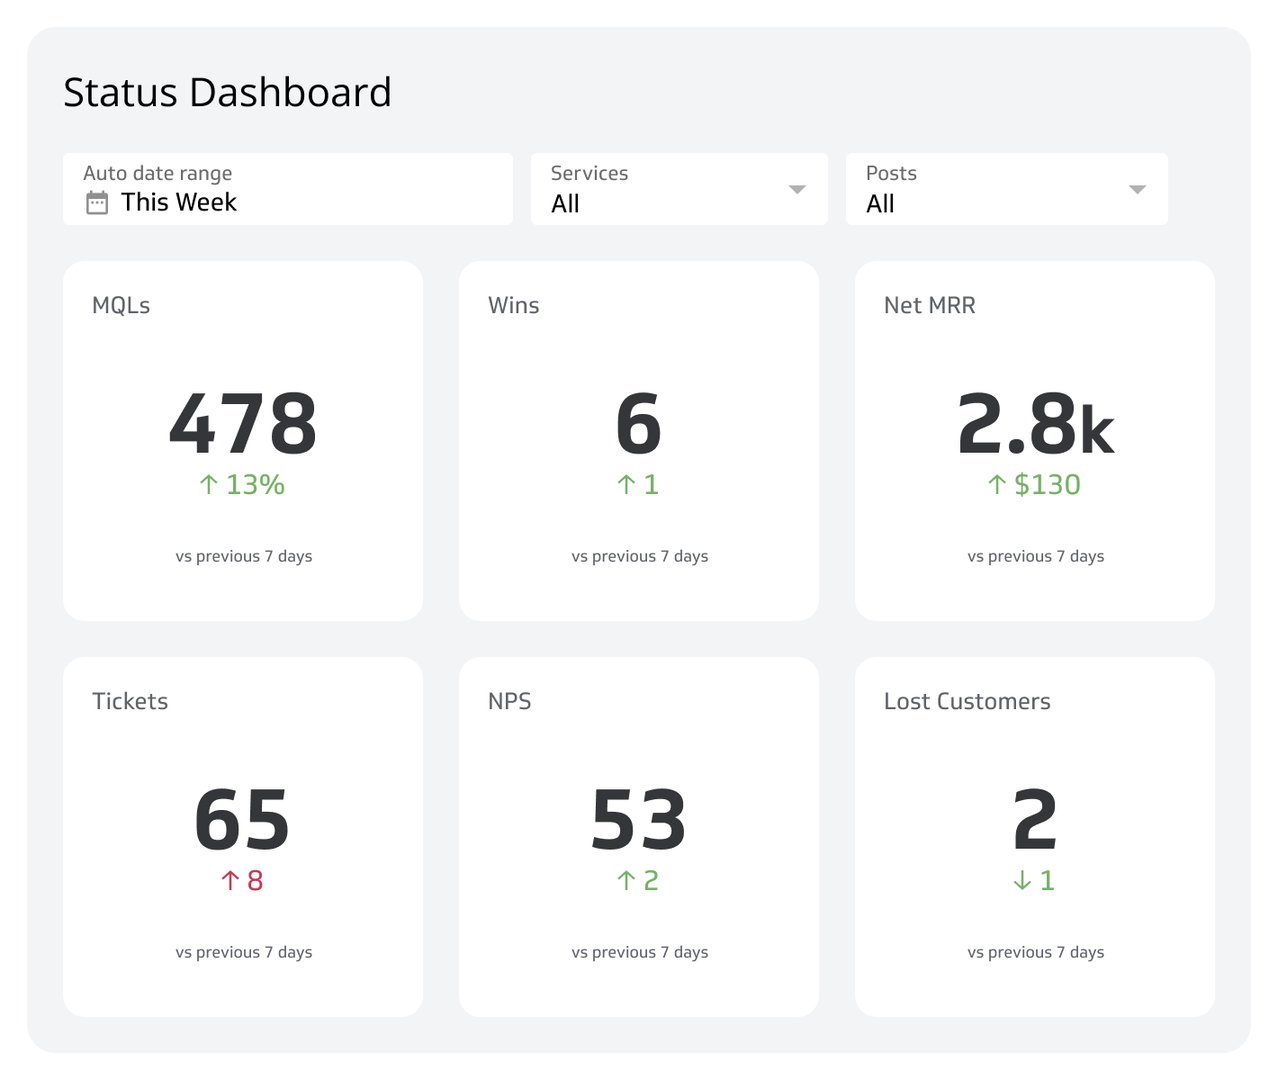 Related Dashboard Examples - Status Dashboard